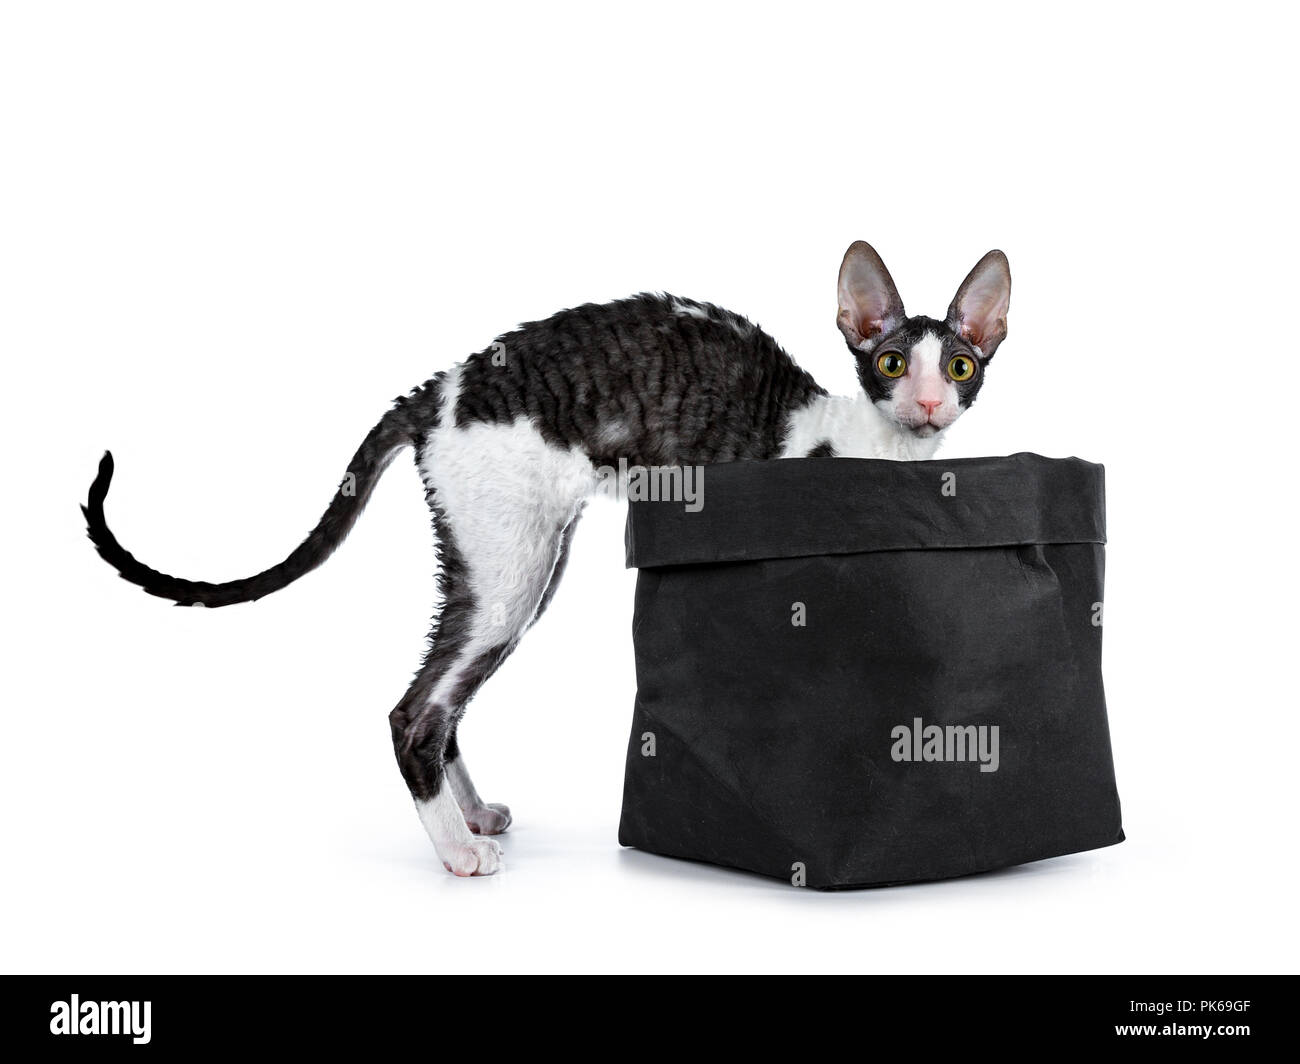 Amazing black bicolor Cornish Rex cat kitten girl standing wit front paws in black bag and tail down, looking curious to camera isolated on a white ba Stock Photo